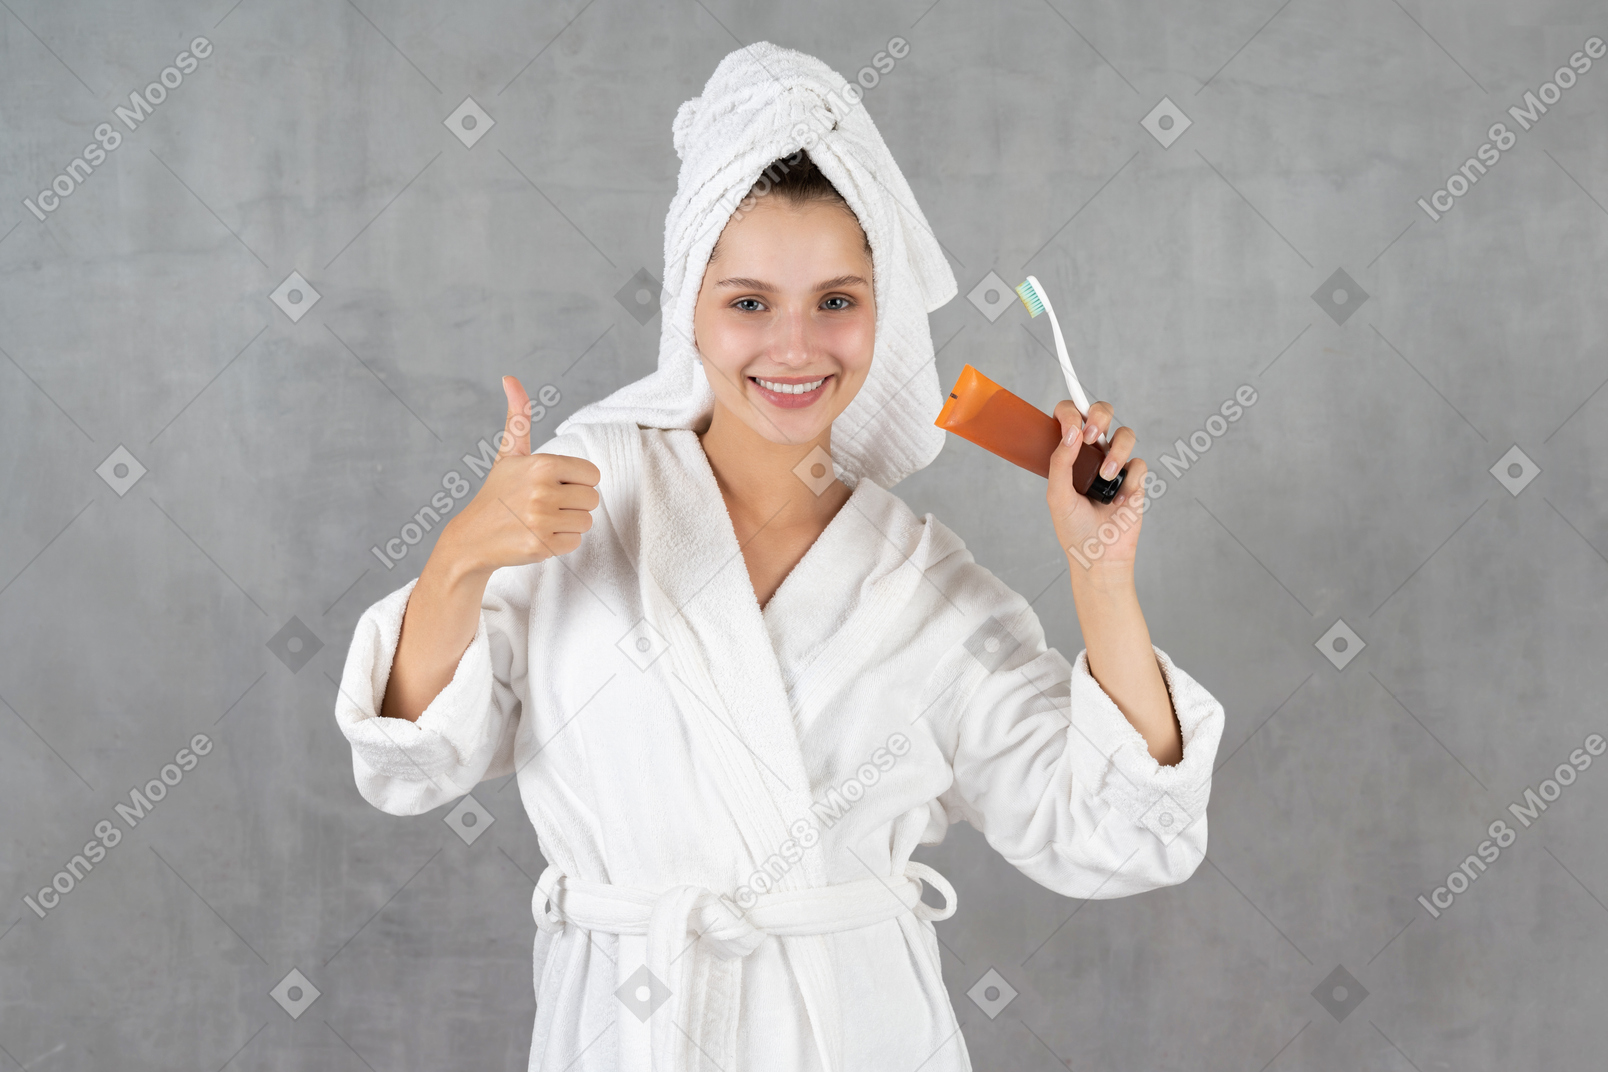 Smiling woman in bathrobe showing thumbs up